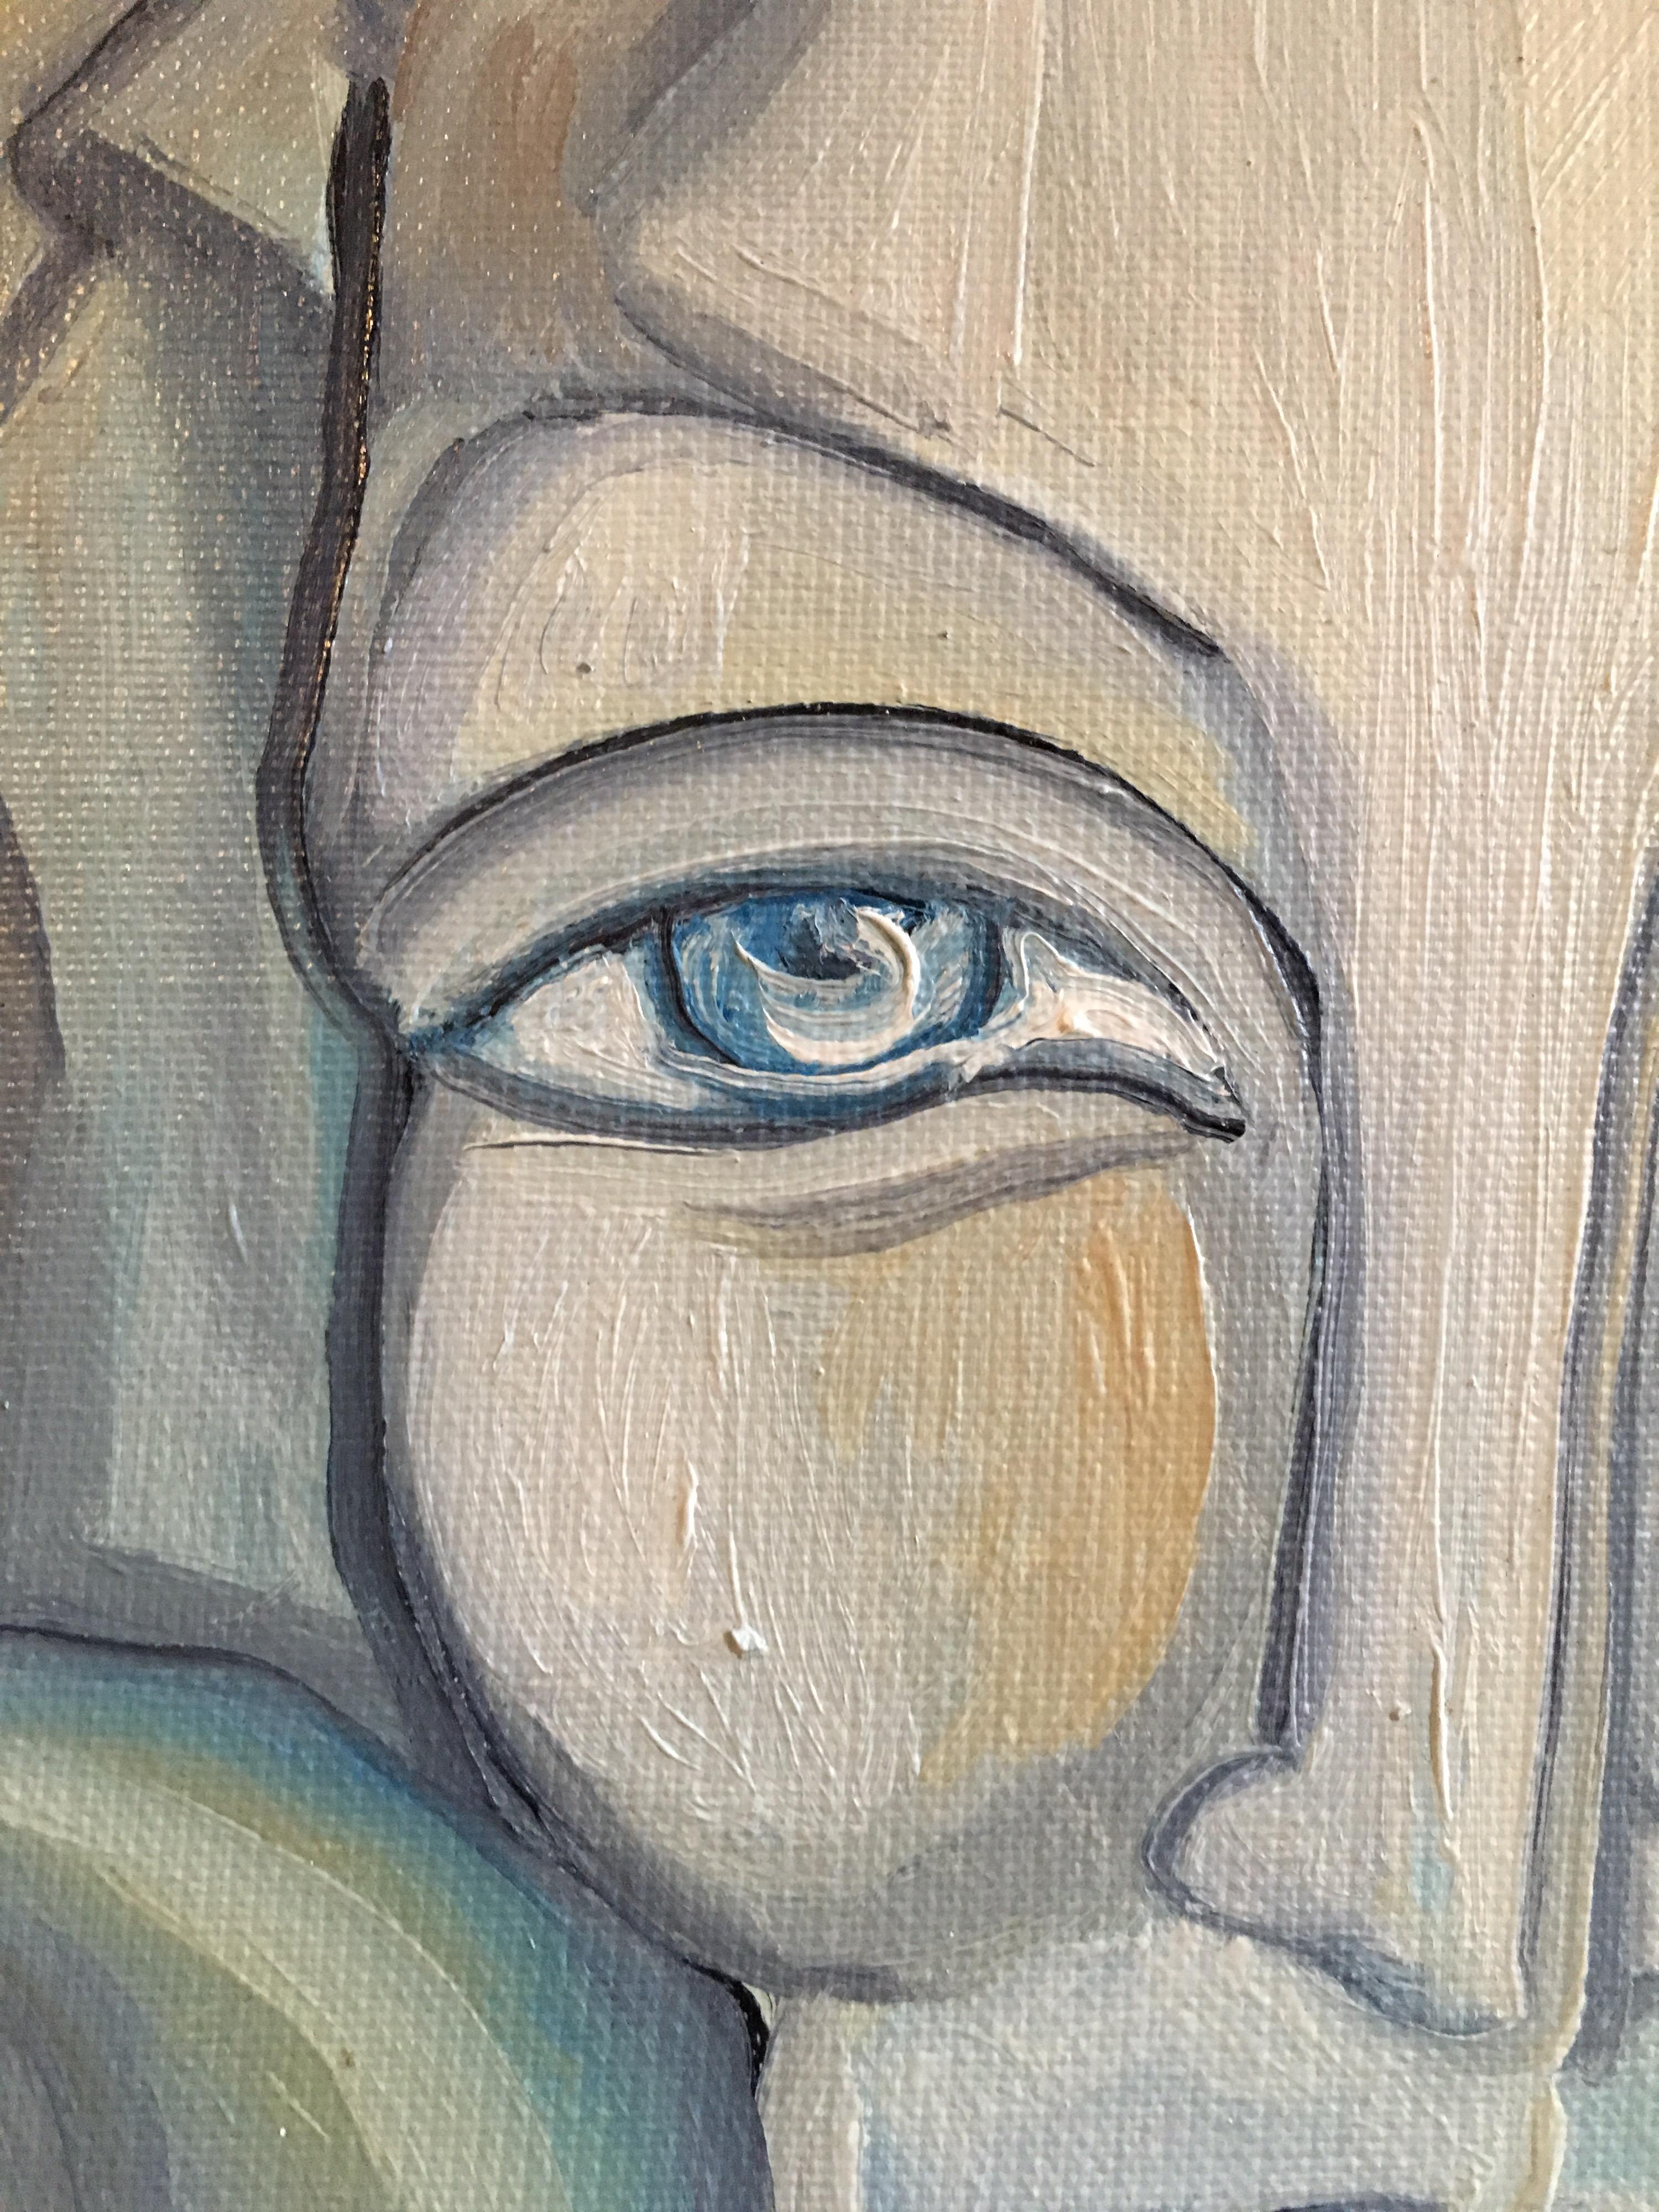 Blue Coloured Portrait, Cubist Abstract, Original Oil Painting, Signed 
By French artist Beatrice Werlie, early 21st Century
Titled 'Lavande' in the lower right hand corner
Oil painting on canvas, unframed
Canvas size: 18.5 x 15 inches

Sensational